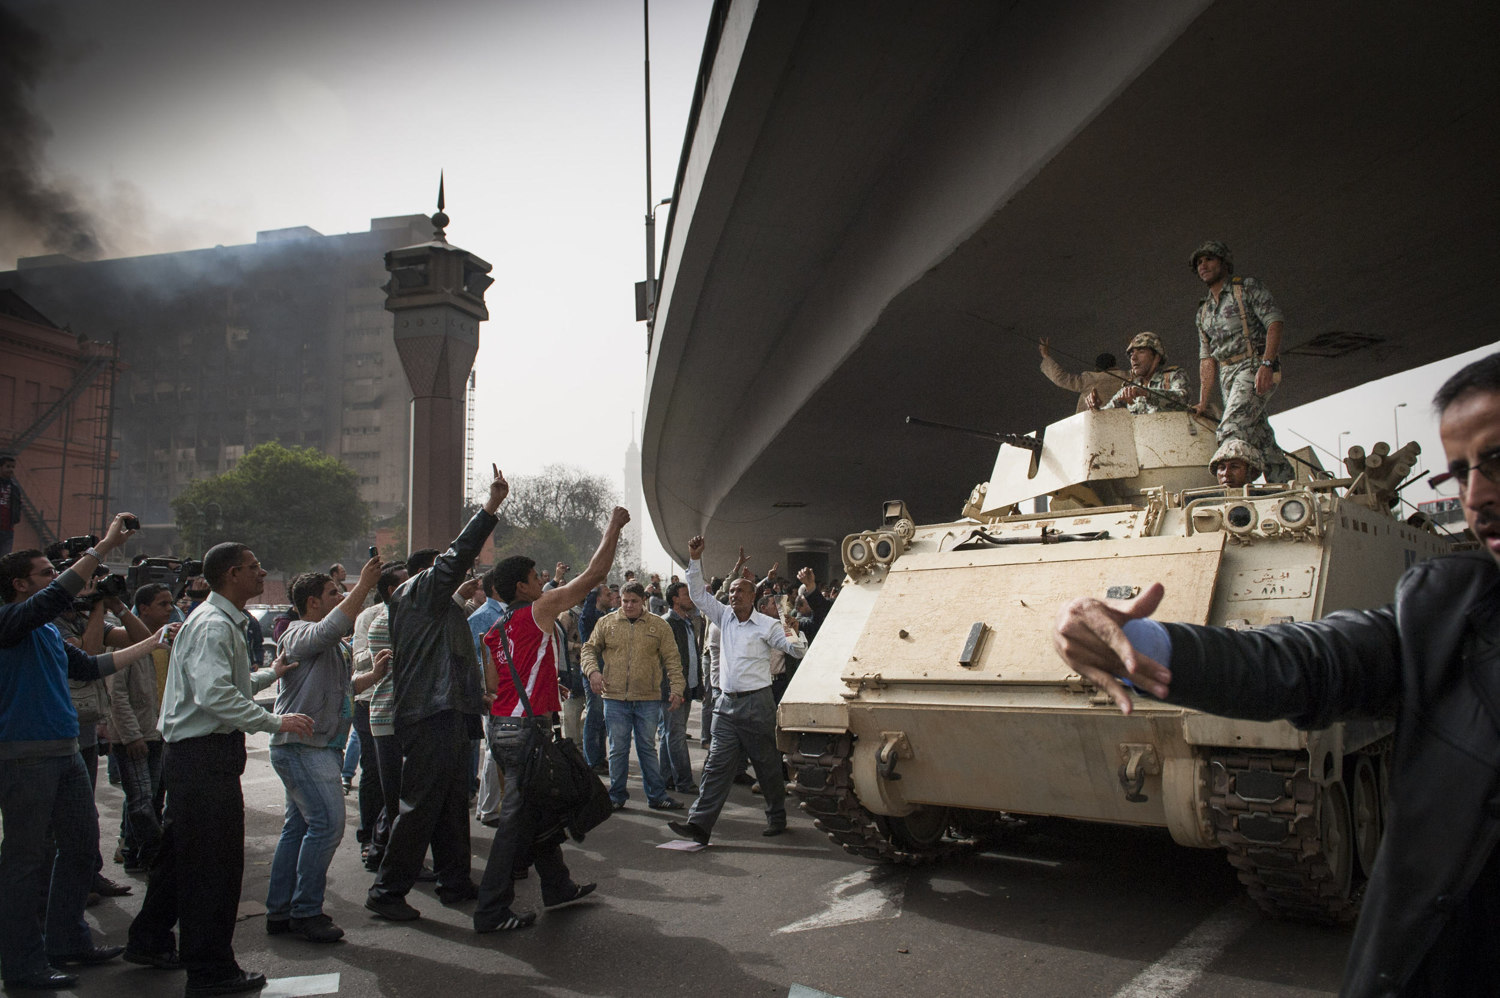  Crowds cheer on the military as they enter the square as government building in the background still smolder from the "Day of Rage" on January 29, 2011. 